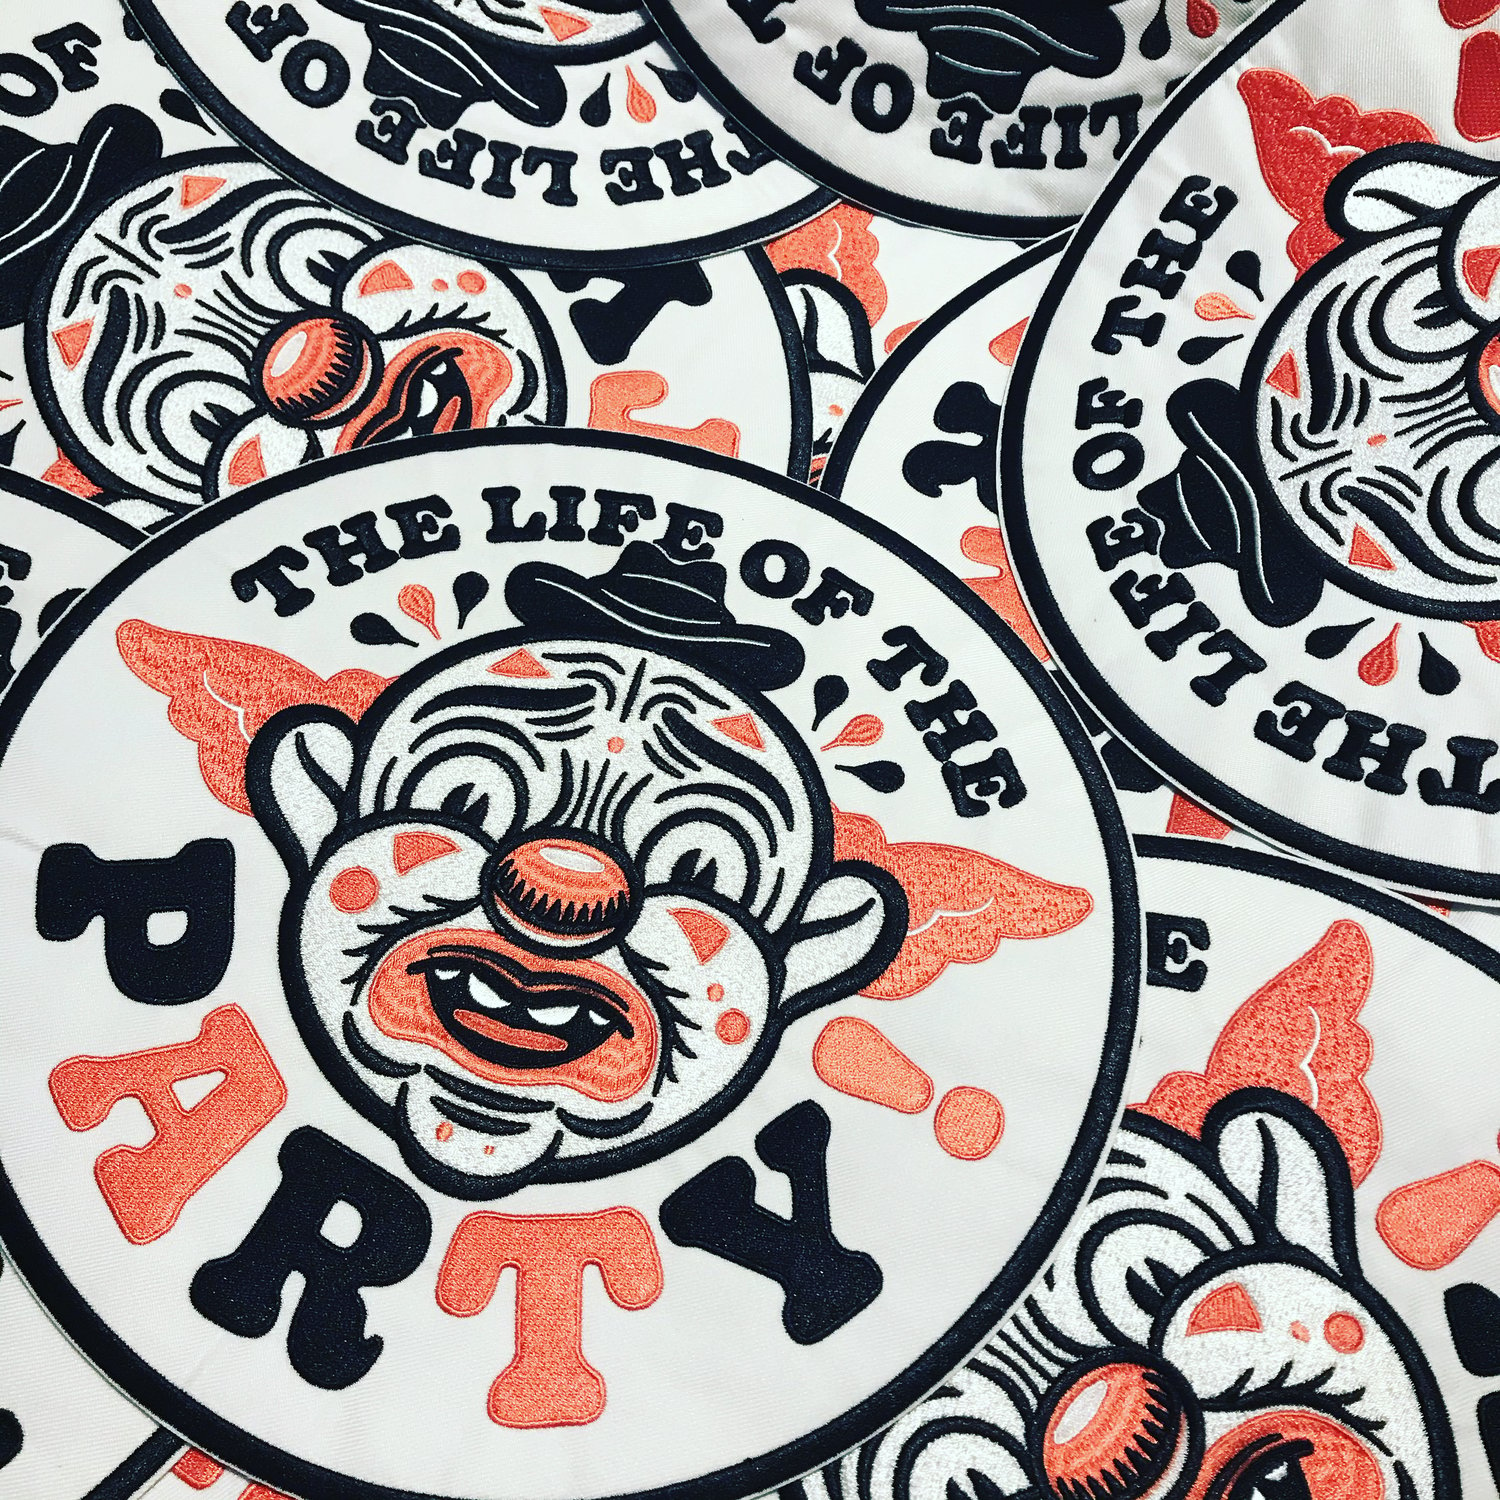 Life of the Party Back Patch